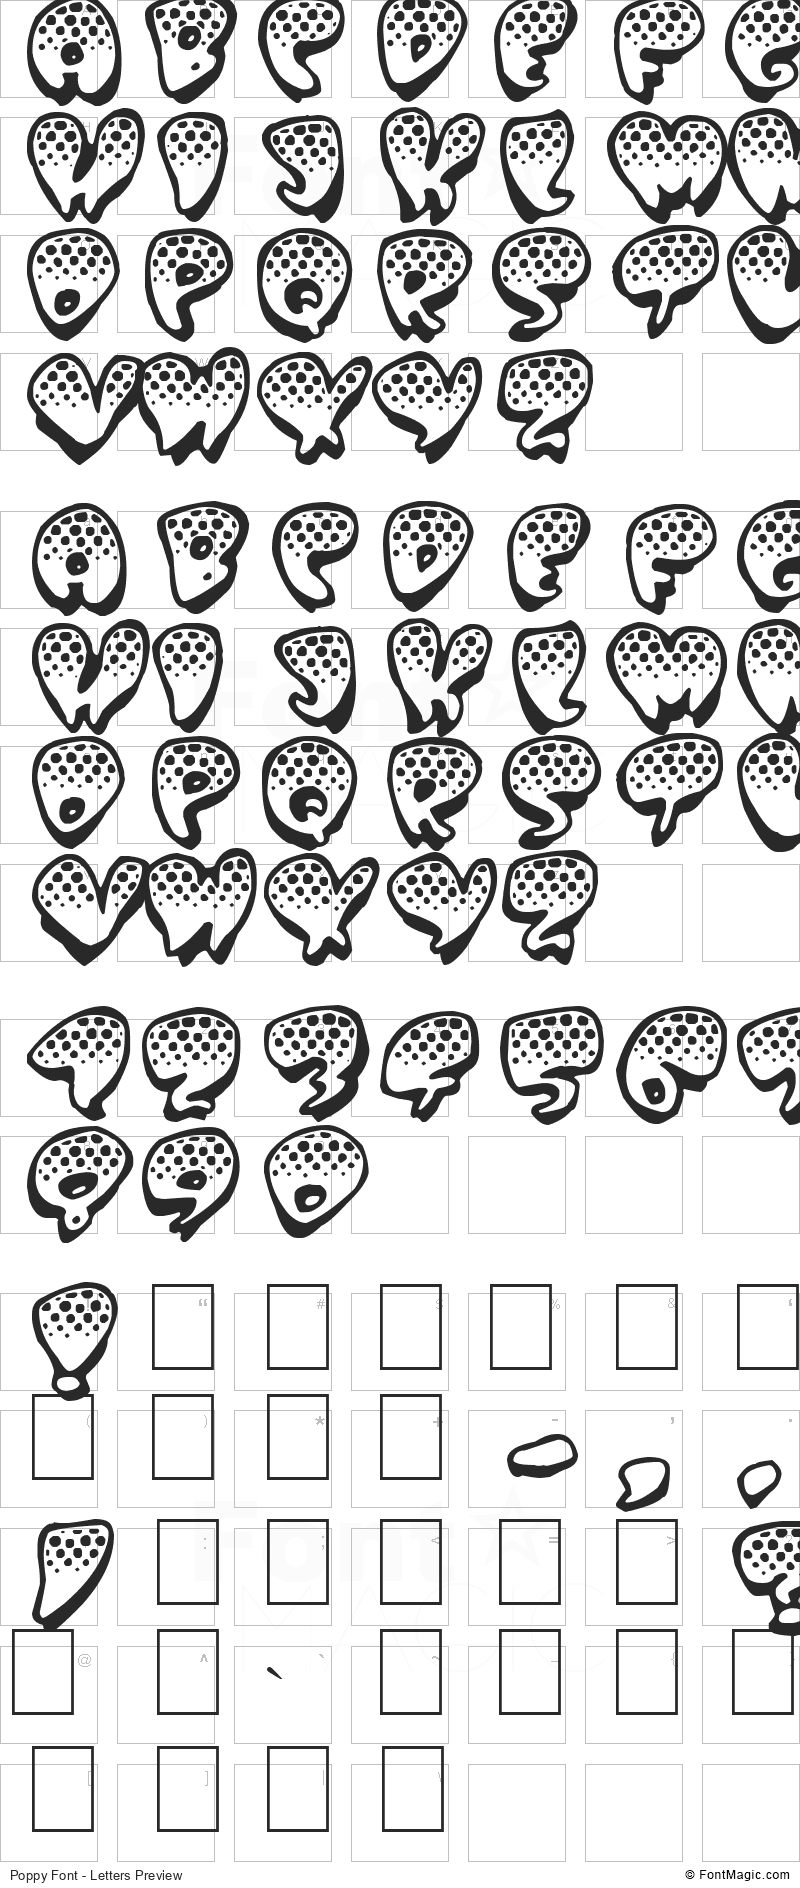 Poppy Font - All Latters Preview Chart